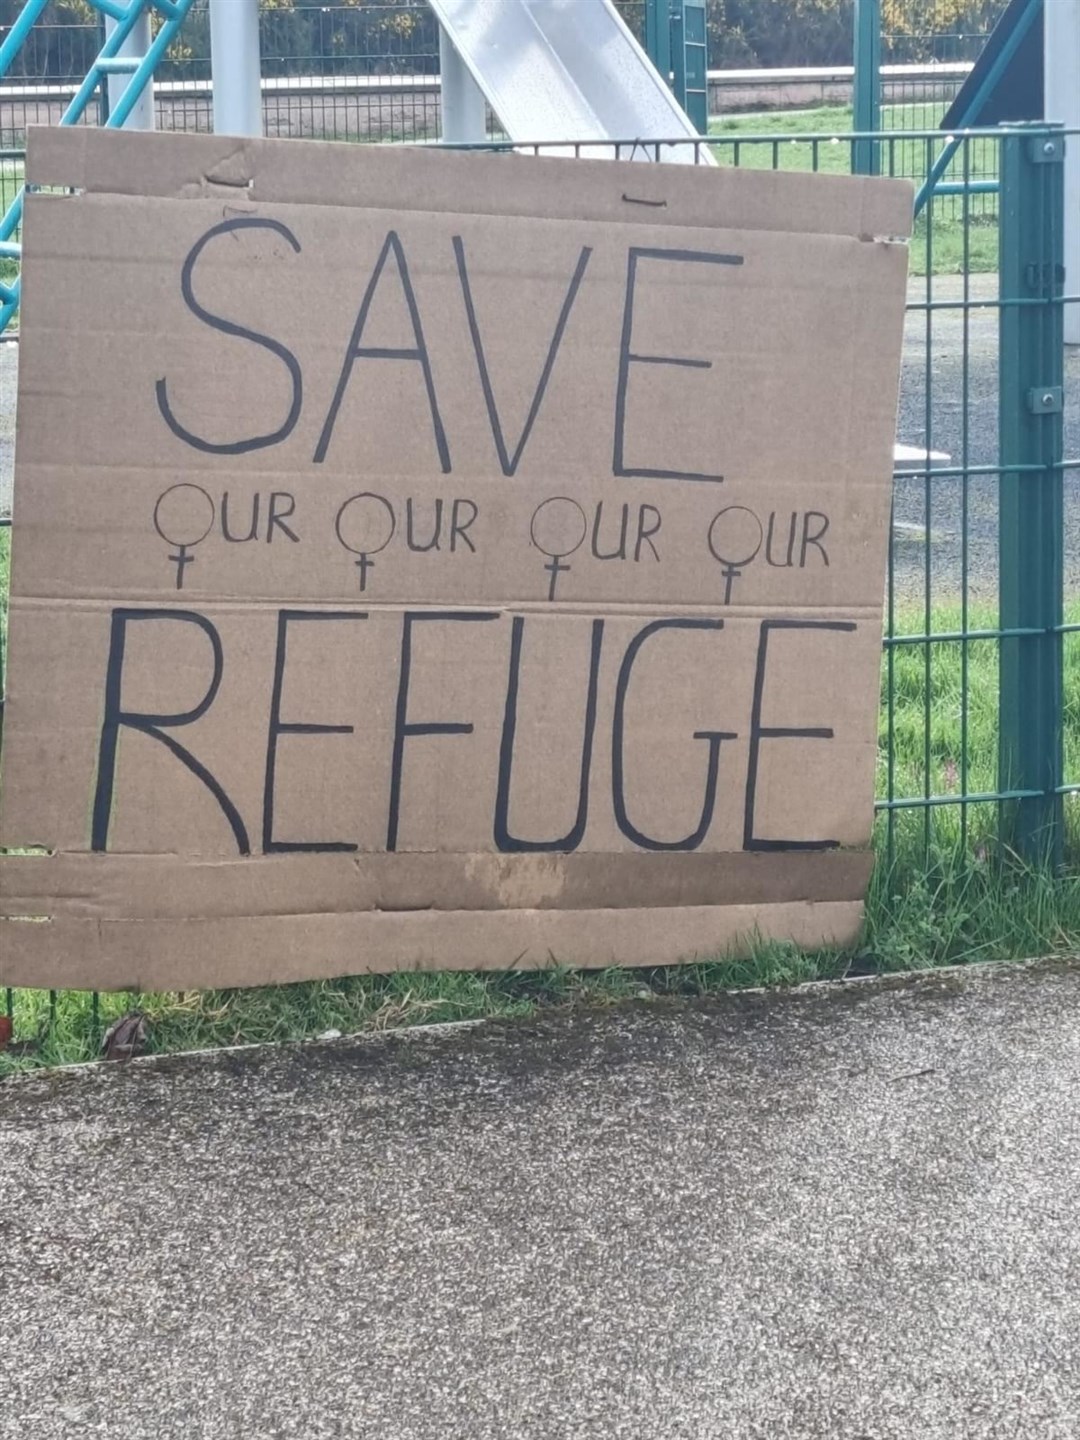 Plans earlier this year to close the Women's Aid refuge in Inverness raised fears that the Dingwall refuge would be left to serve the entire region.